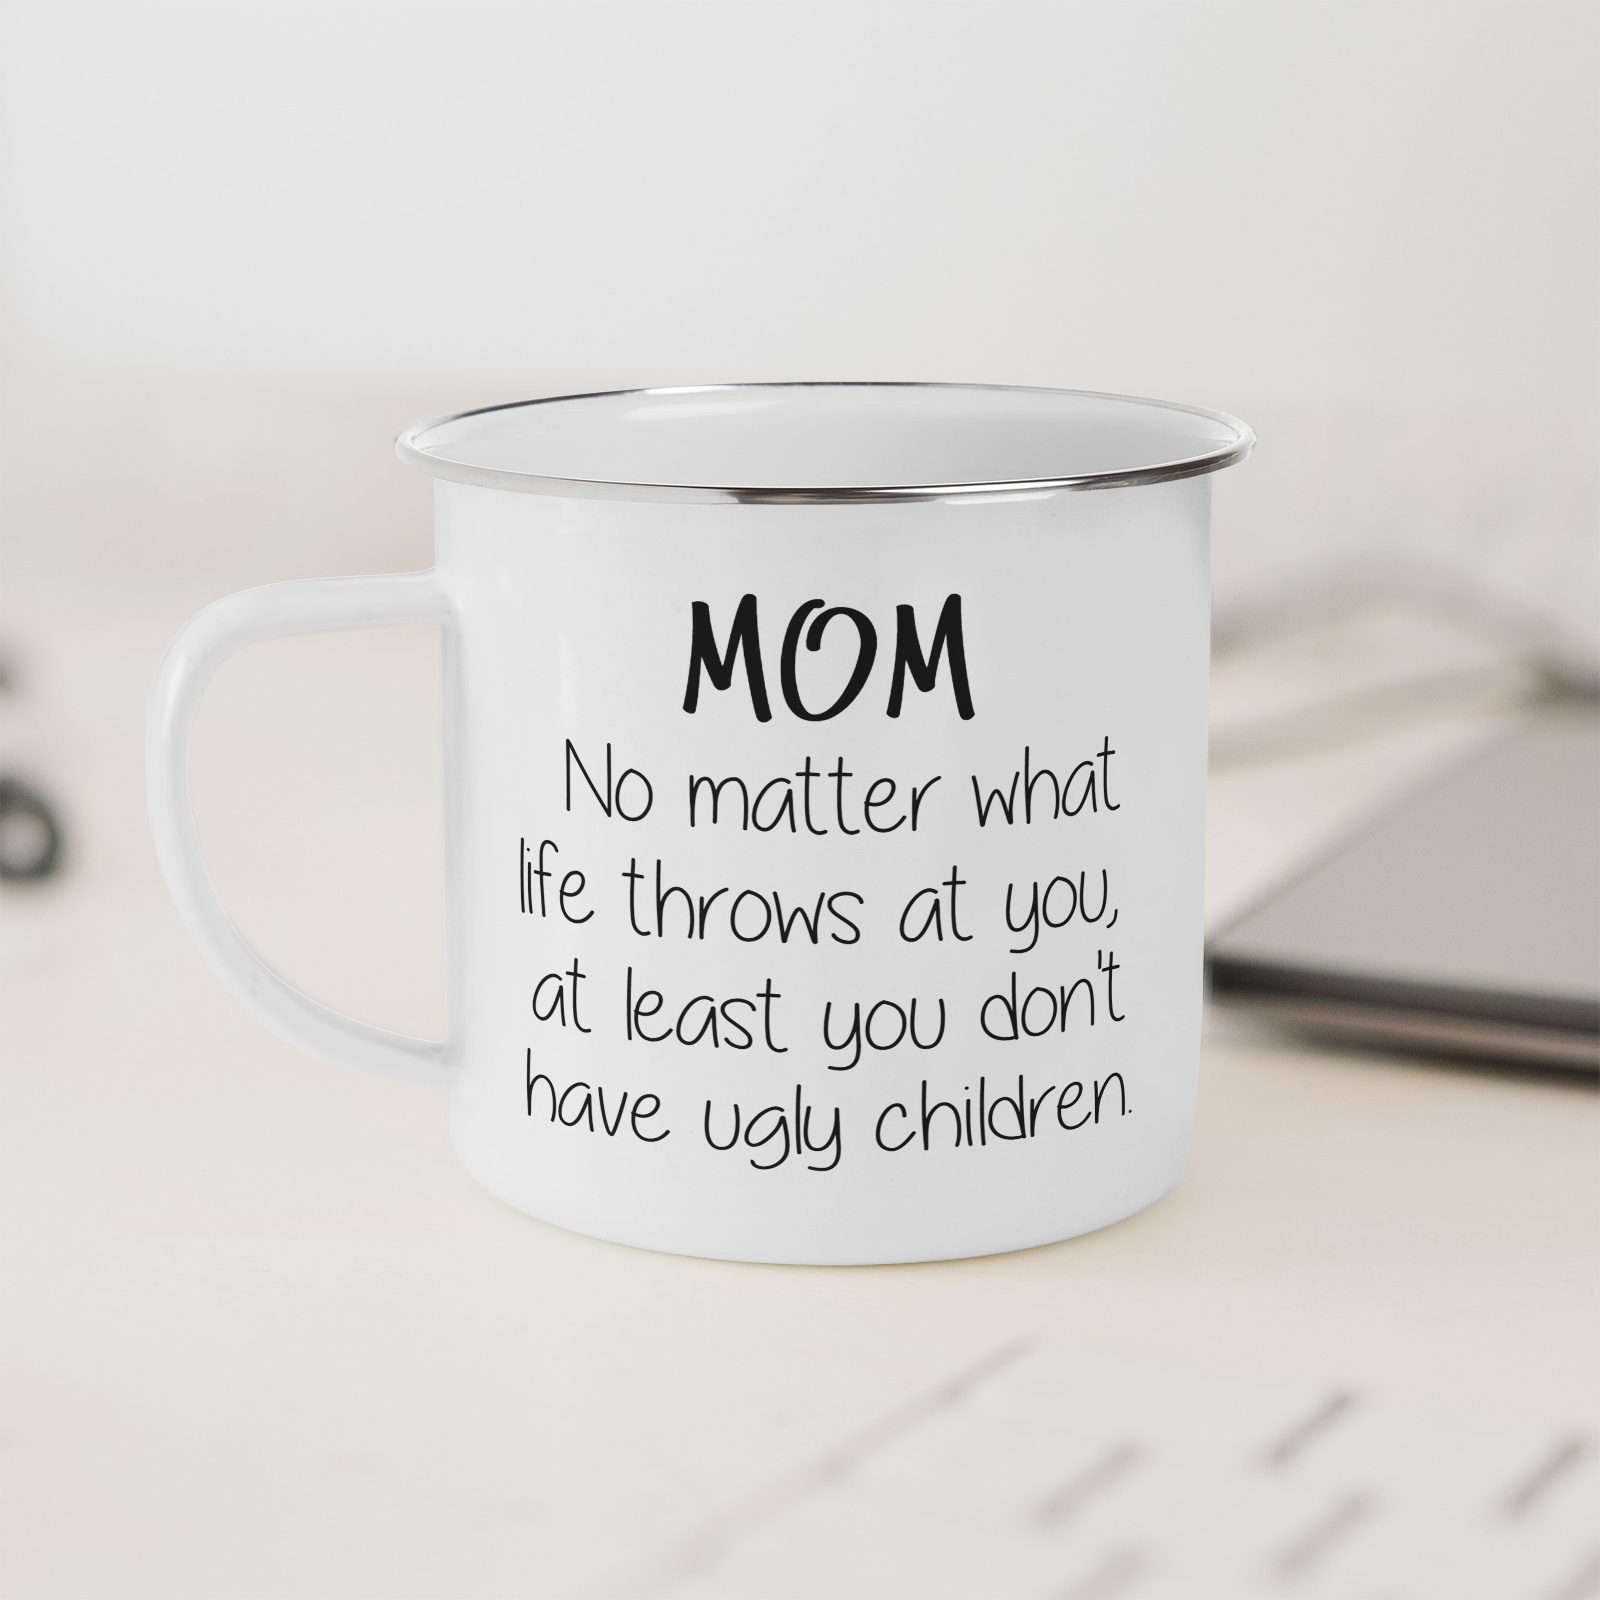 Funny Mom Gifts, Gift From Daughter, Gifts for Mom, Mother's Day Gift, Funny  Mom Mug, Funny Mom Gift, Mom Mug, Best Mom Ever, Mother Gift 